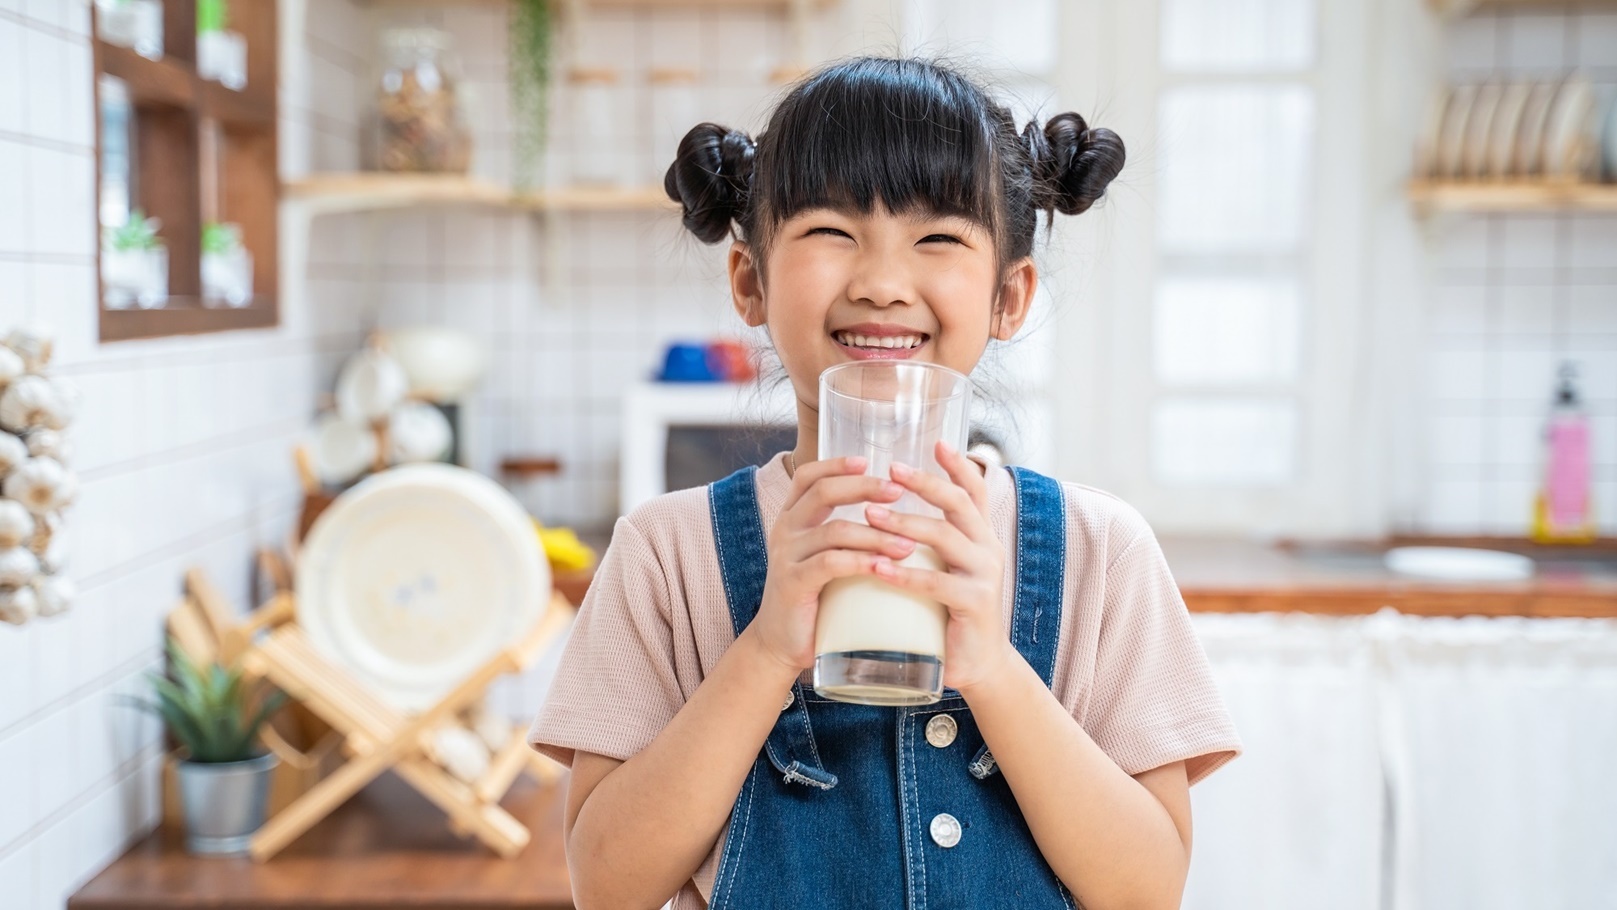 portrait-of-asian-little-cute-kid-holding-a-cup-of-2021-12-09-02-32-20-utc